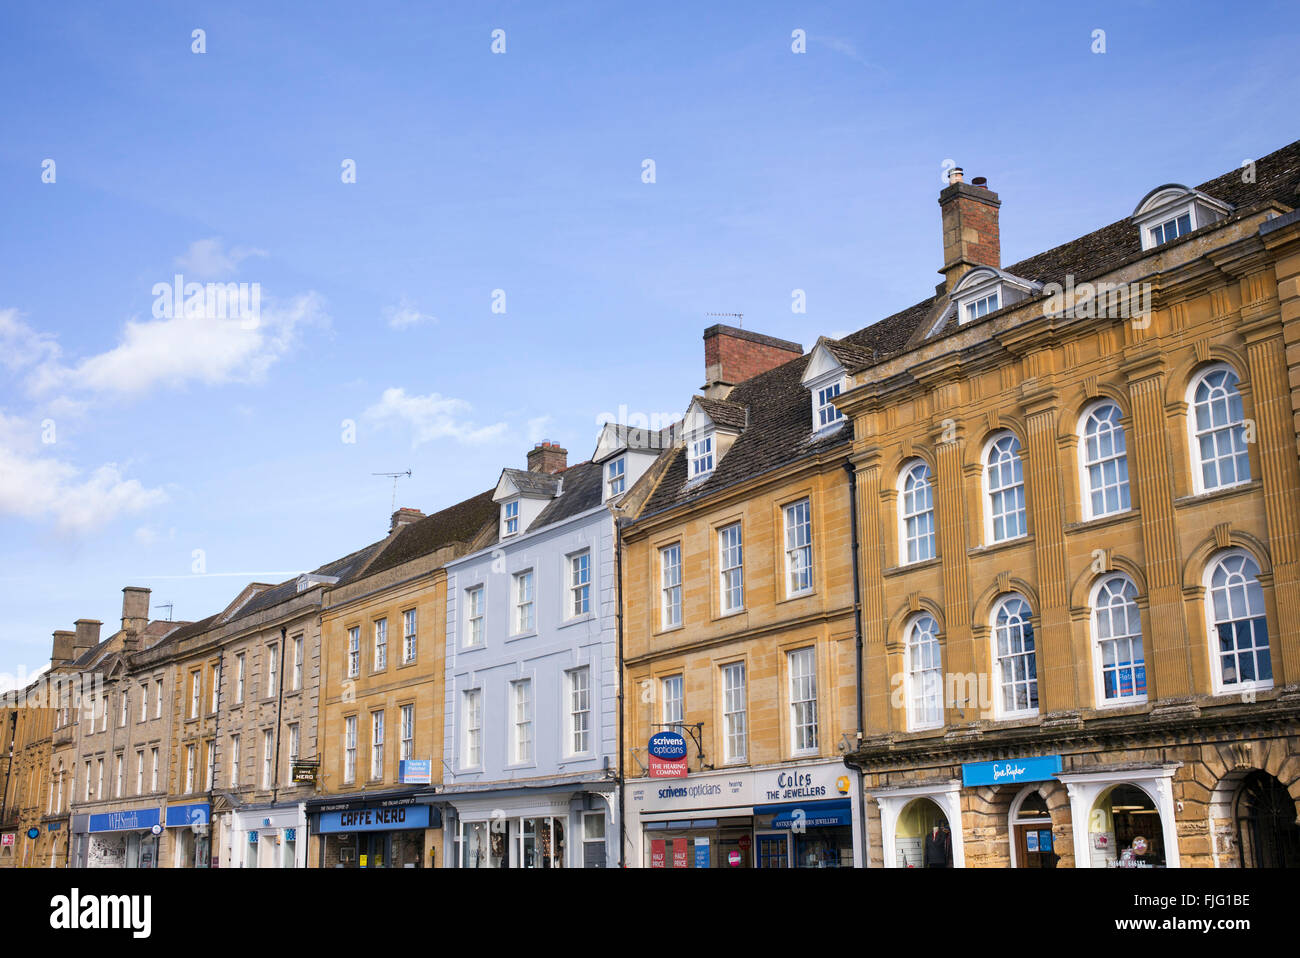 High Street buildings, Chipping Norton, Oxfordshire, England Stock Photo